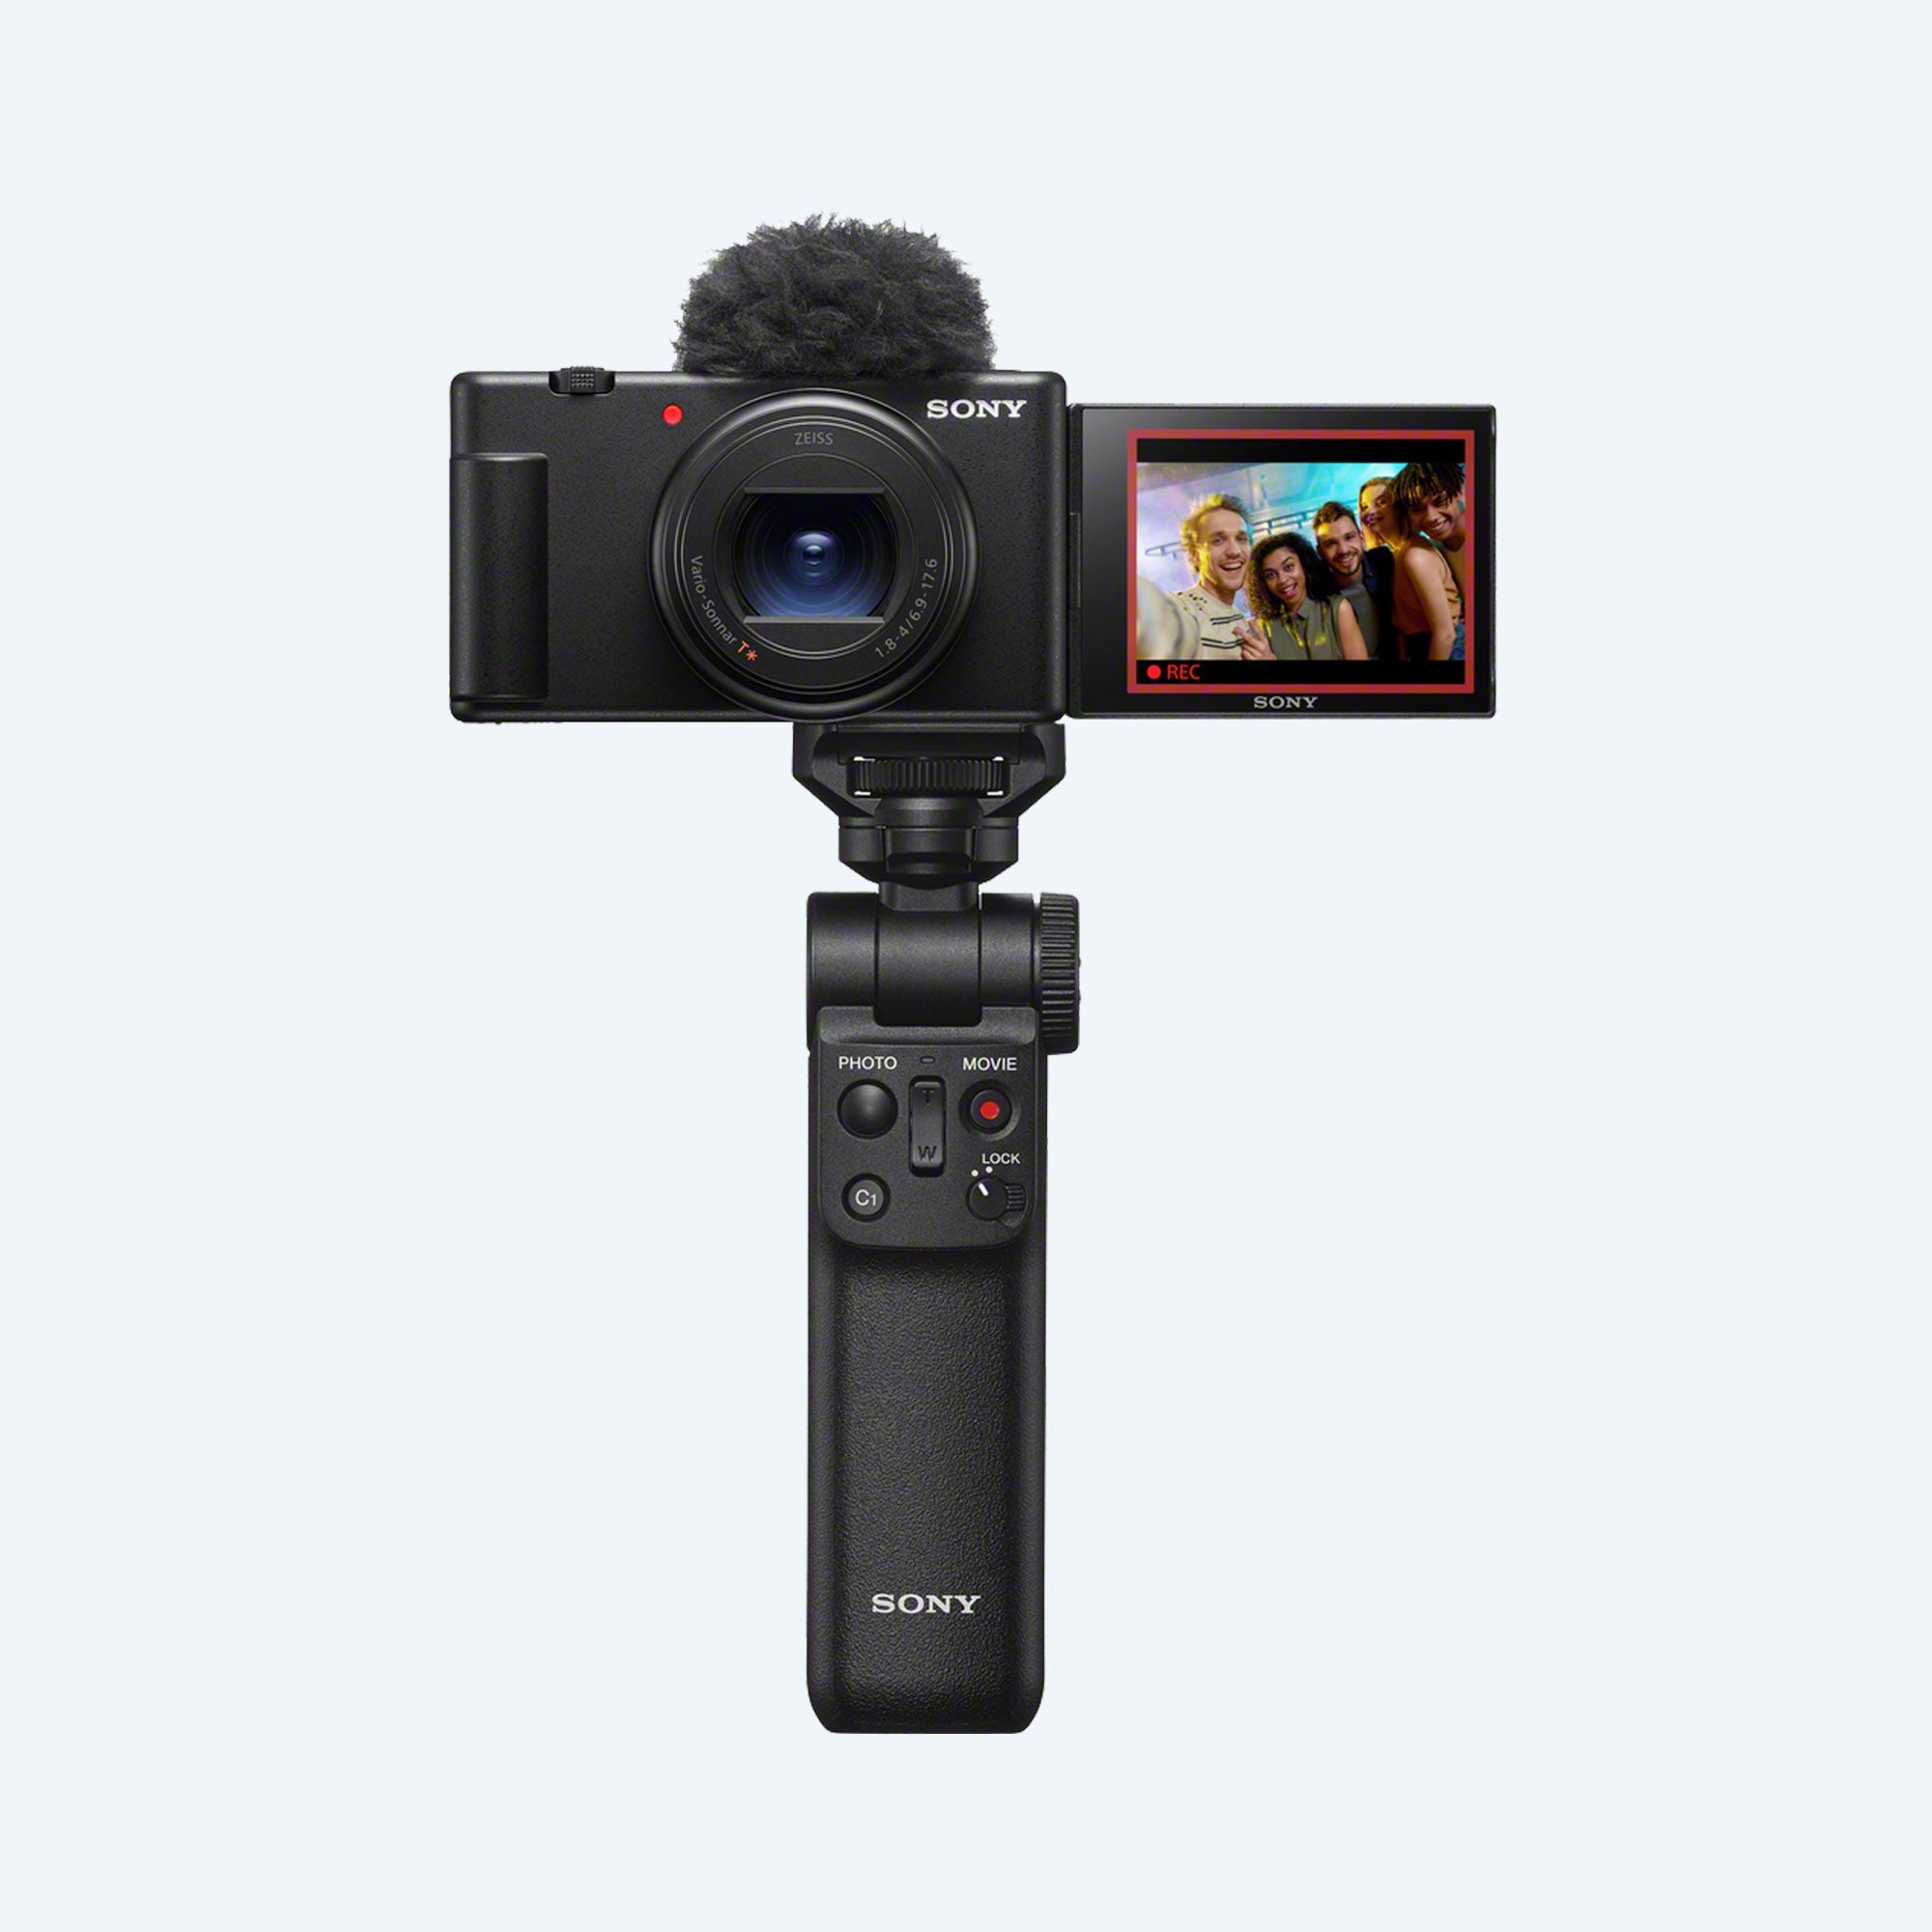 Buy Online Sony Vlog Camera ZV-1 II For Vlogging With Great Image 